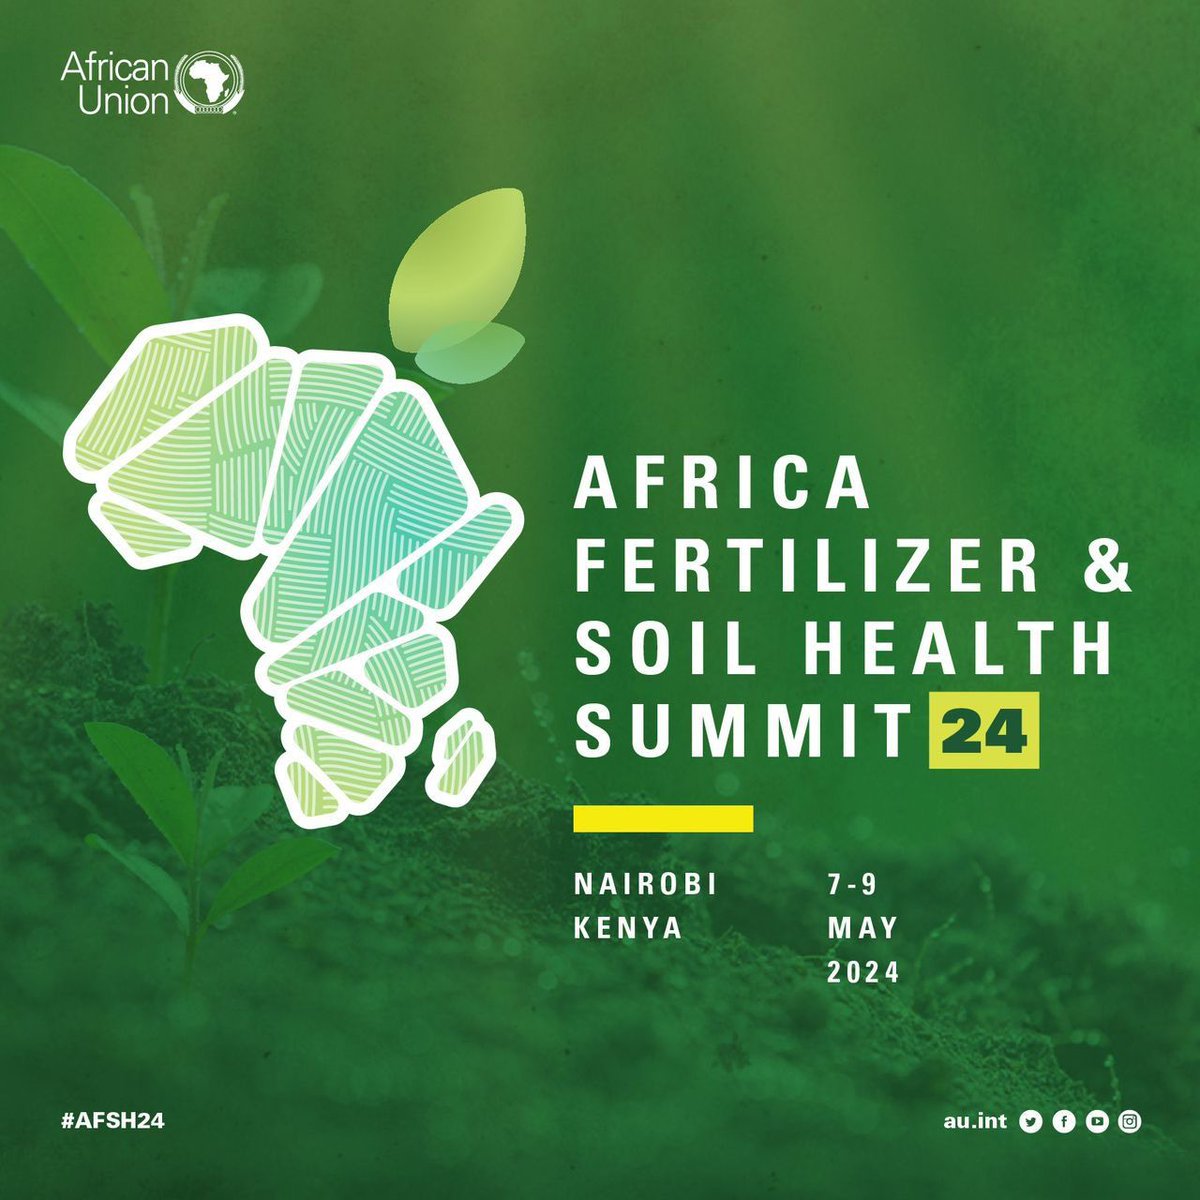 Smallholder farmers are sub-Saharan Africa’s largest employer and main suppliers of food. Their incomes rise and fall based on the health of their soils. African nations are convening this week at #AFSH24 to discuss this critical topic. I look forward to following along!